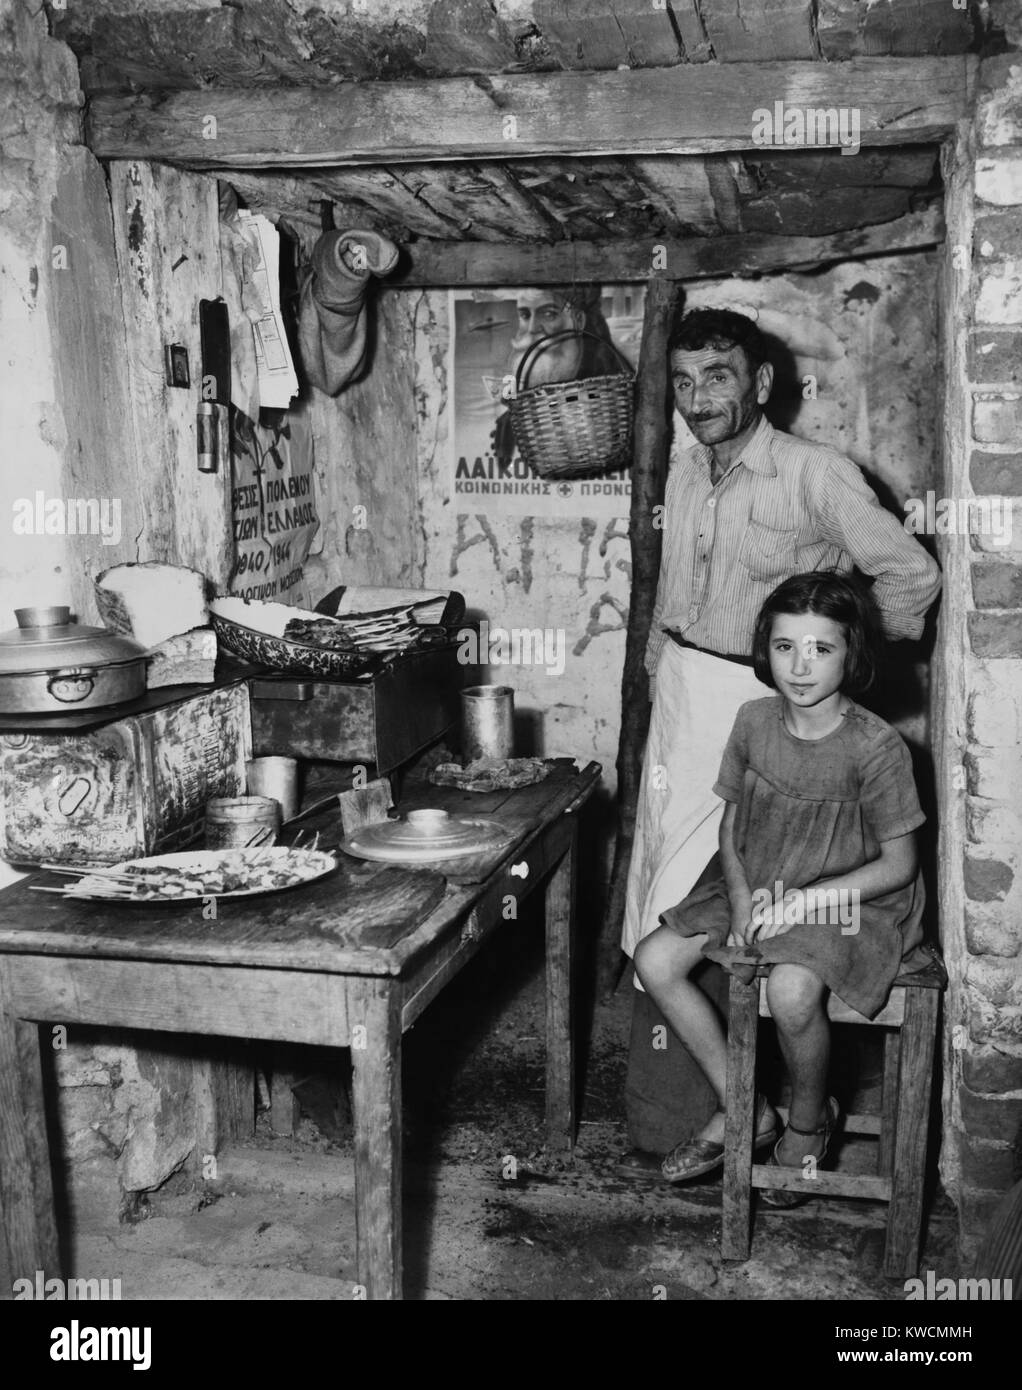 Father and daughter in sparse refugee quarters during the Greek Civil War. August 29, 1947. - (BSLOC 2014 15 225) Stock Photo